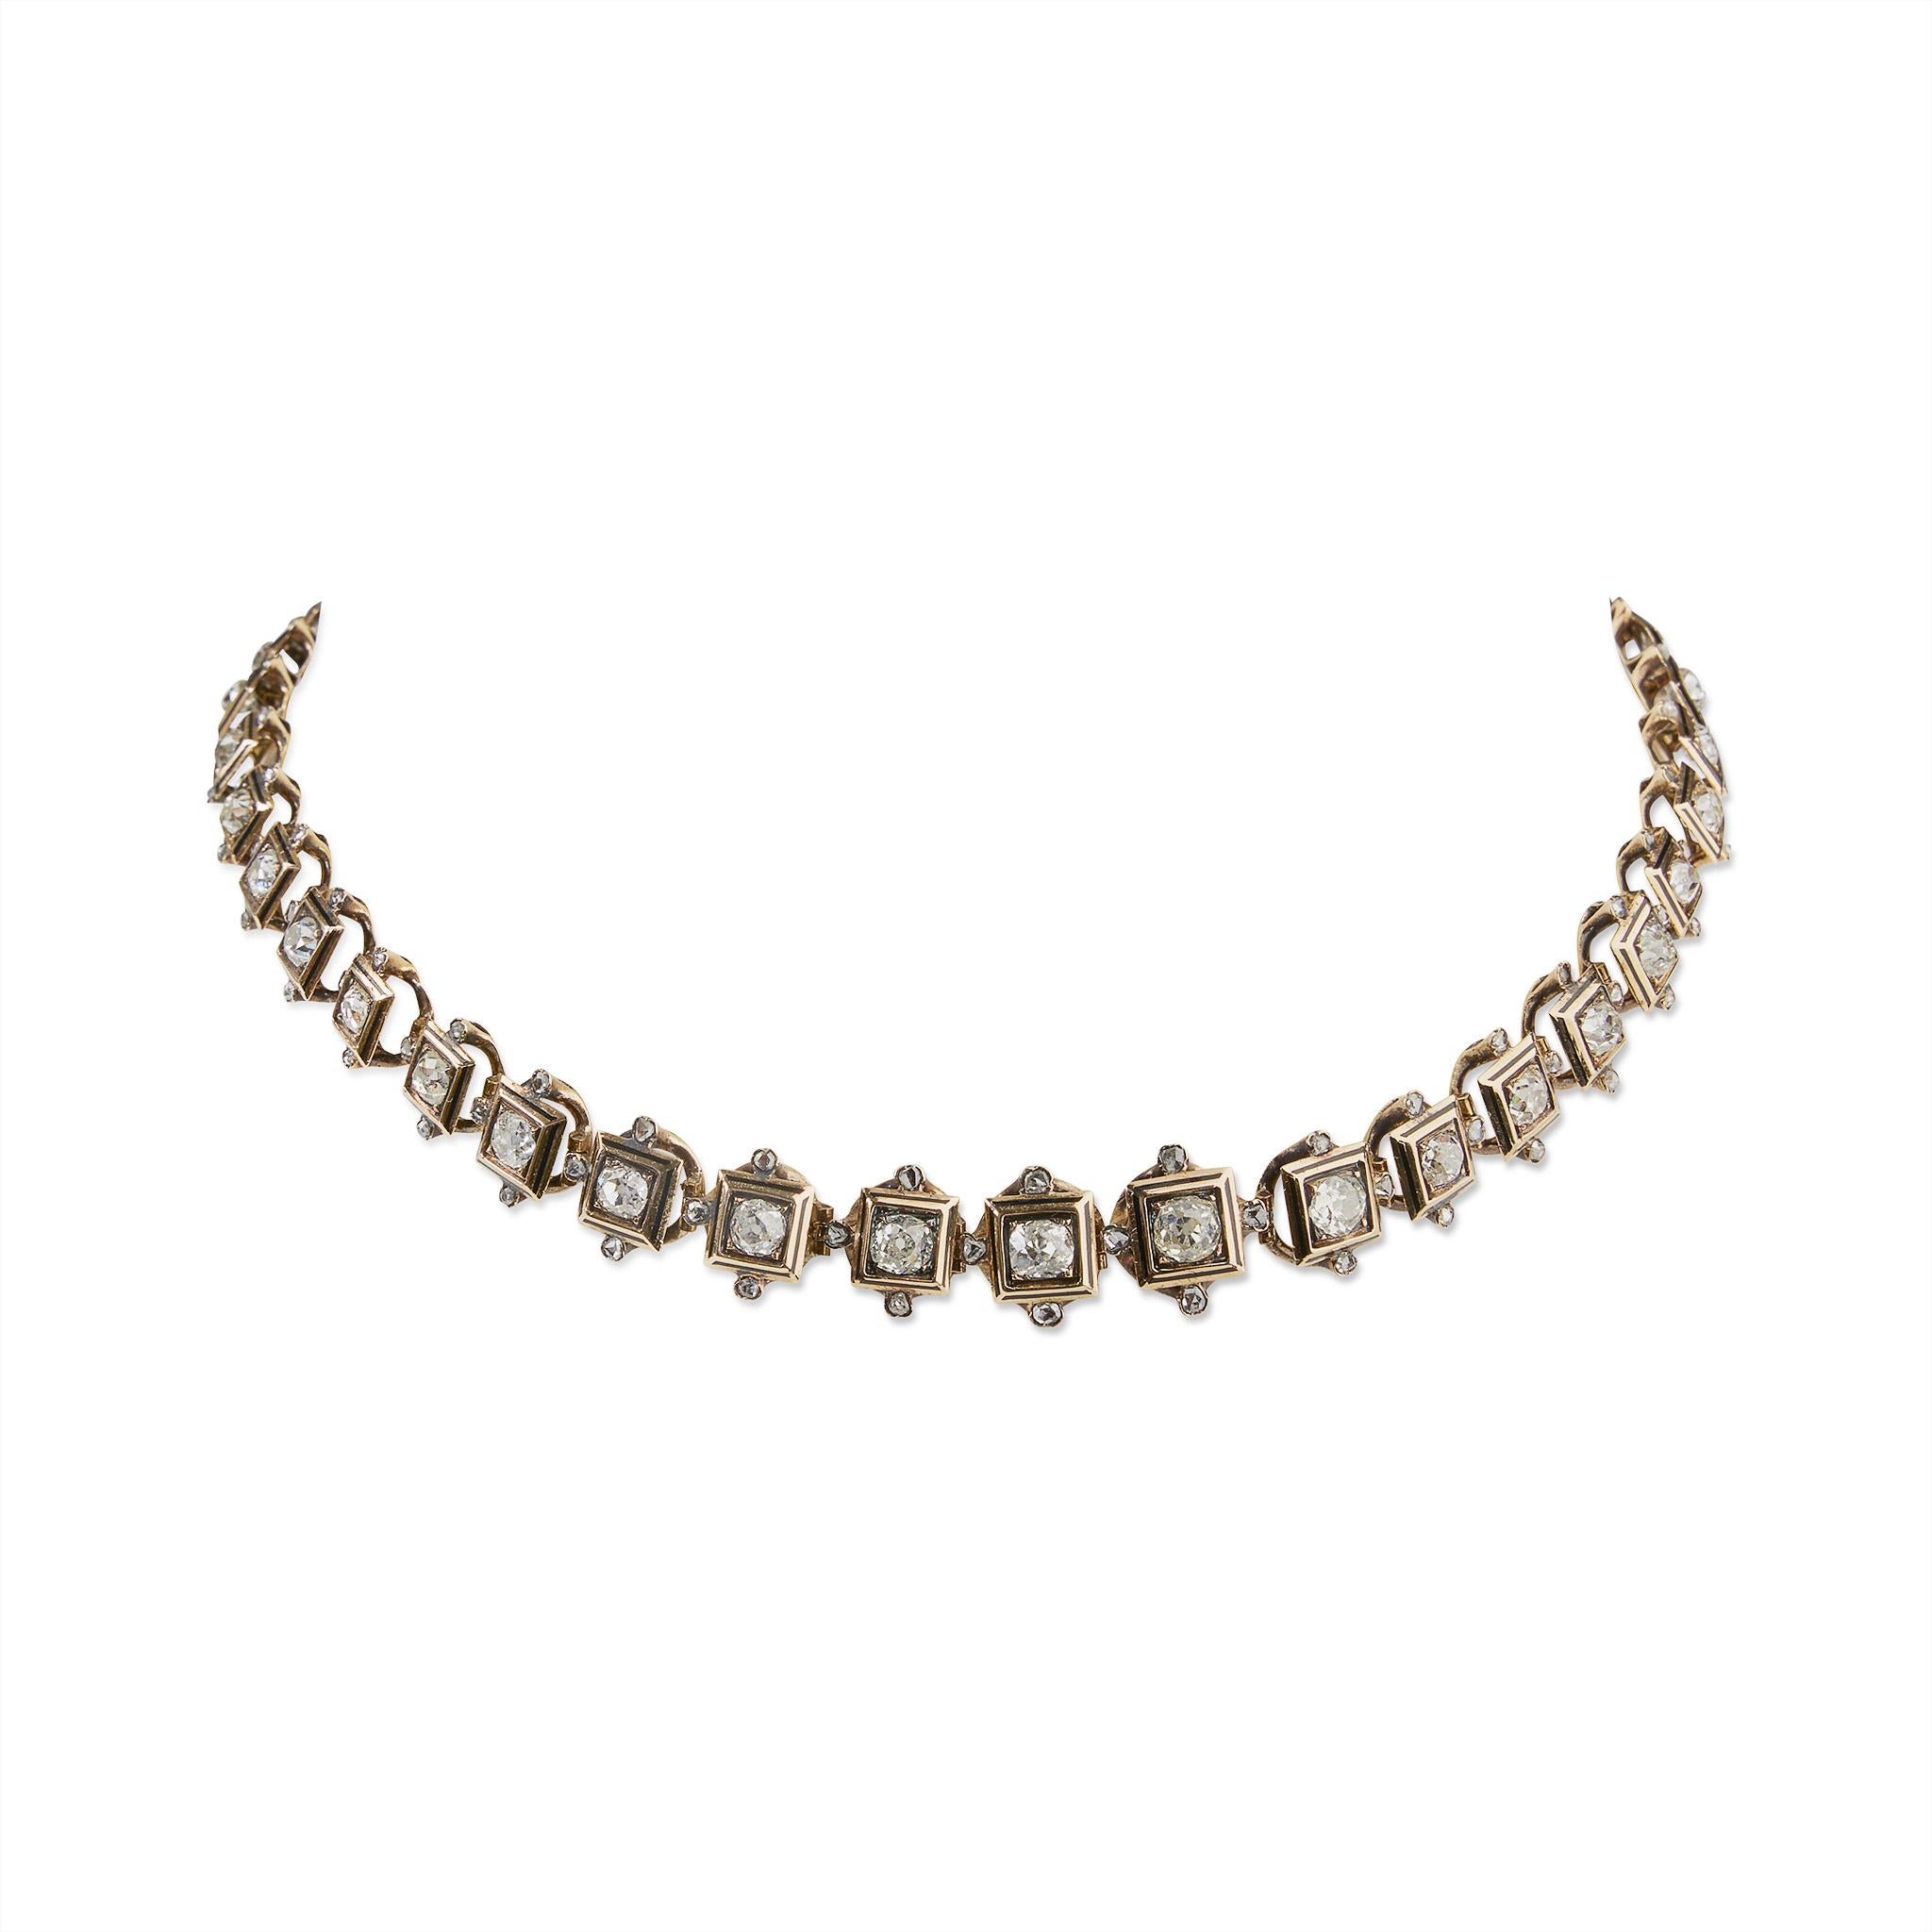 Composed of old mine and rose-cut diamonds, this rivière necklace is mounted in enameled 18K gold. Each old-mine cut diamond, graduating in size from approximately 0.50 carat to 0.15 carat, is box-set, with a champlevé black enamel surround, and